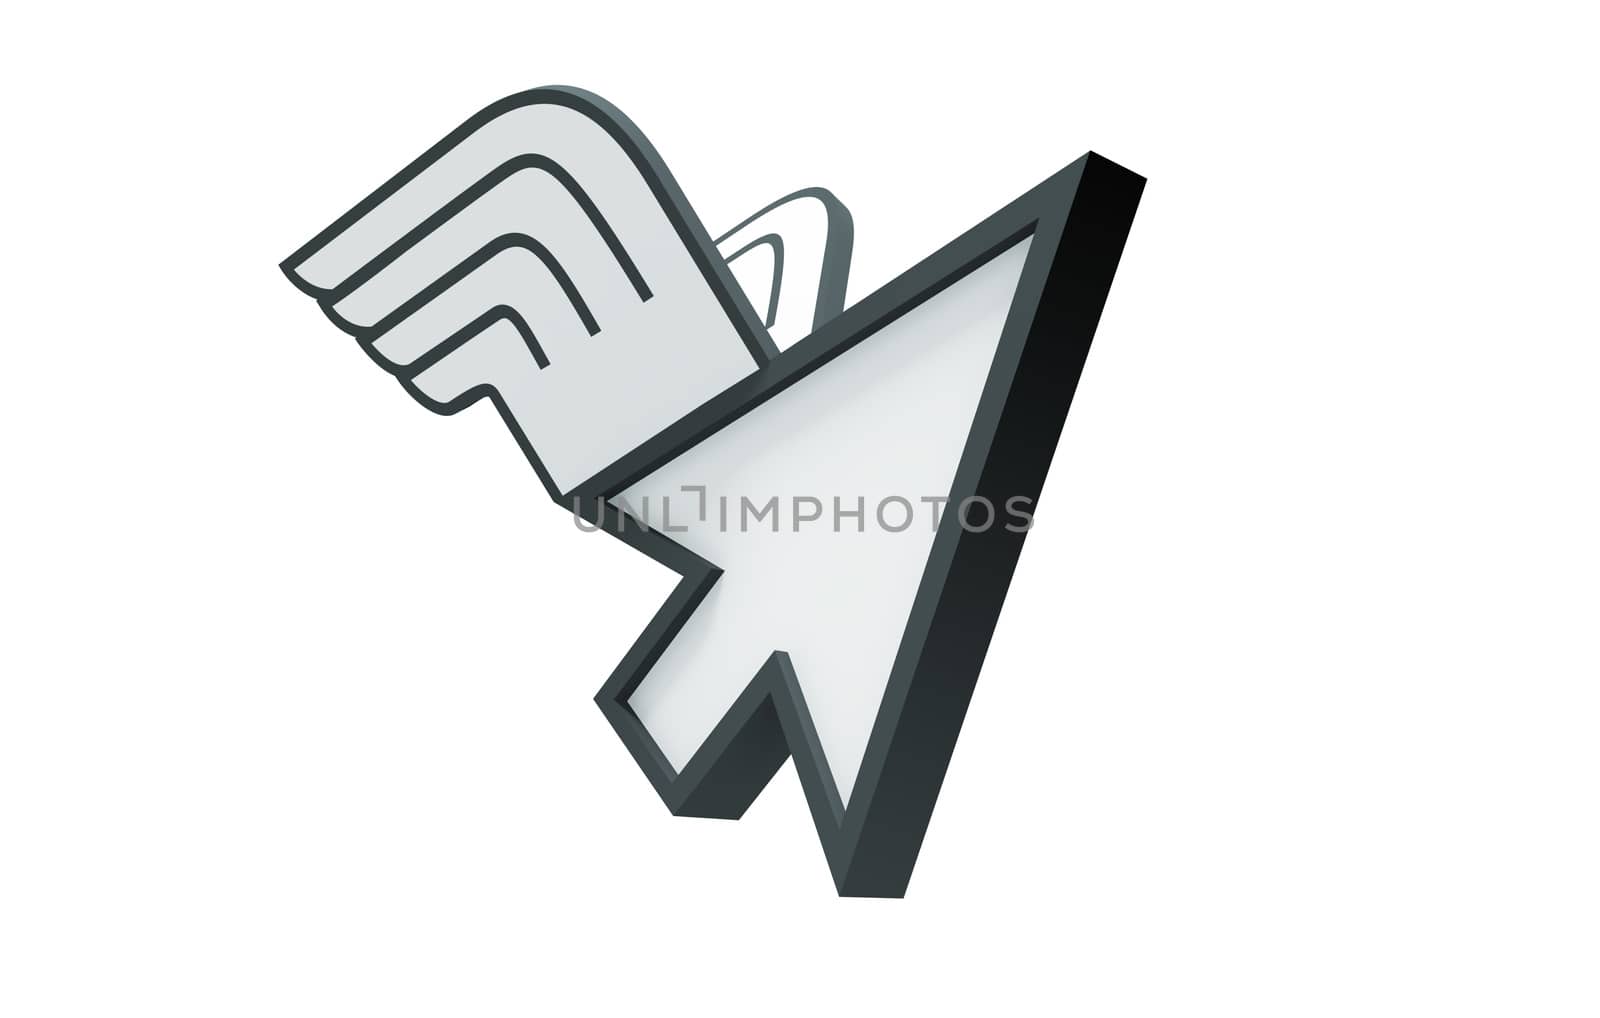 Cursor flying with wings on a white background